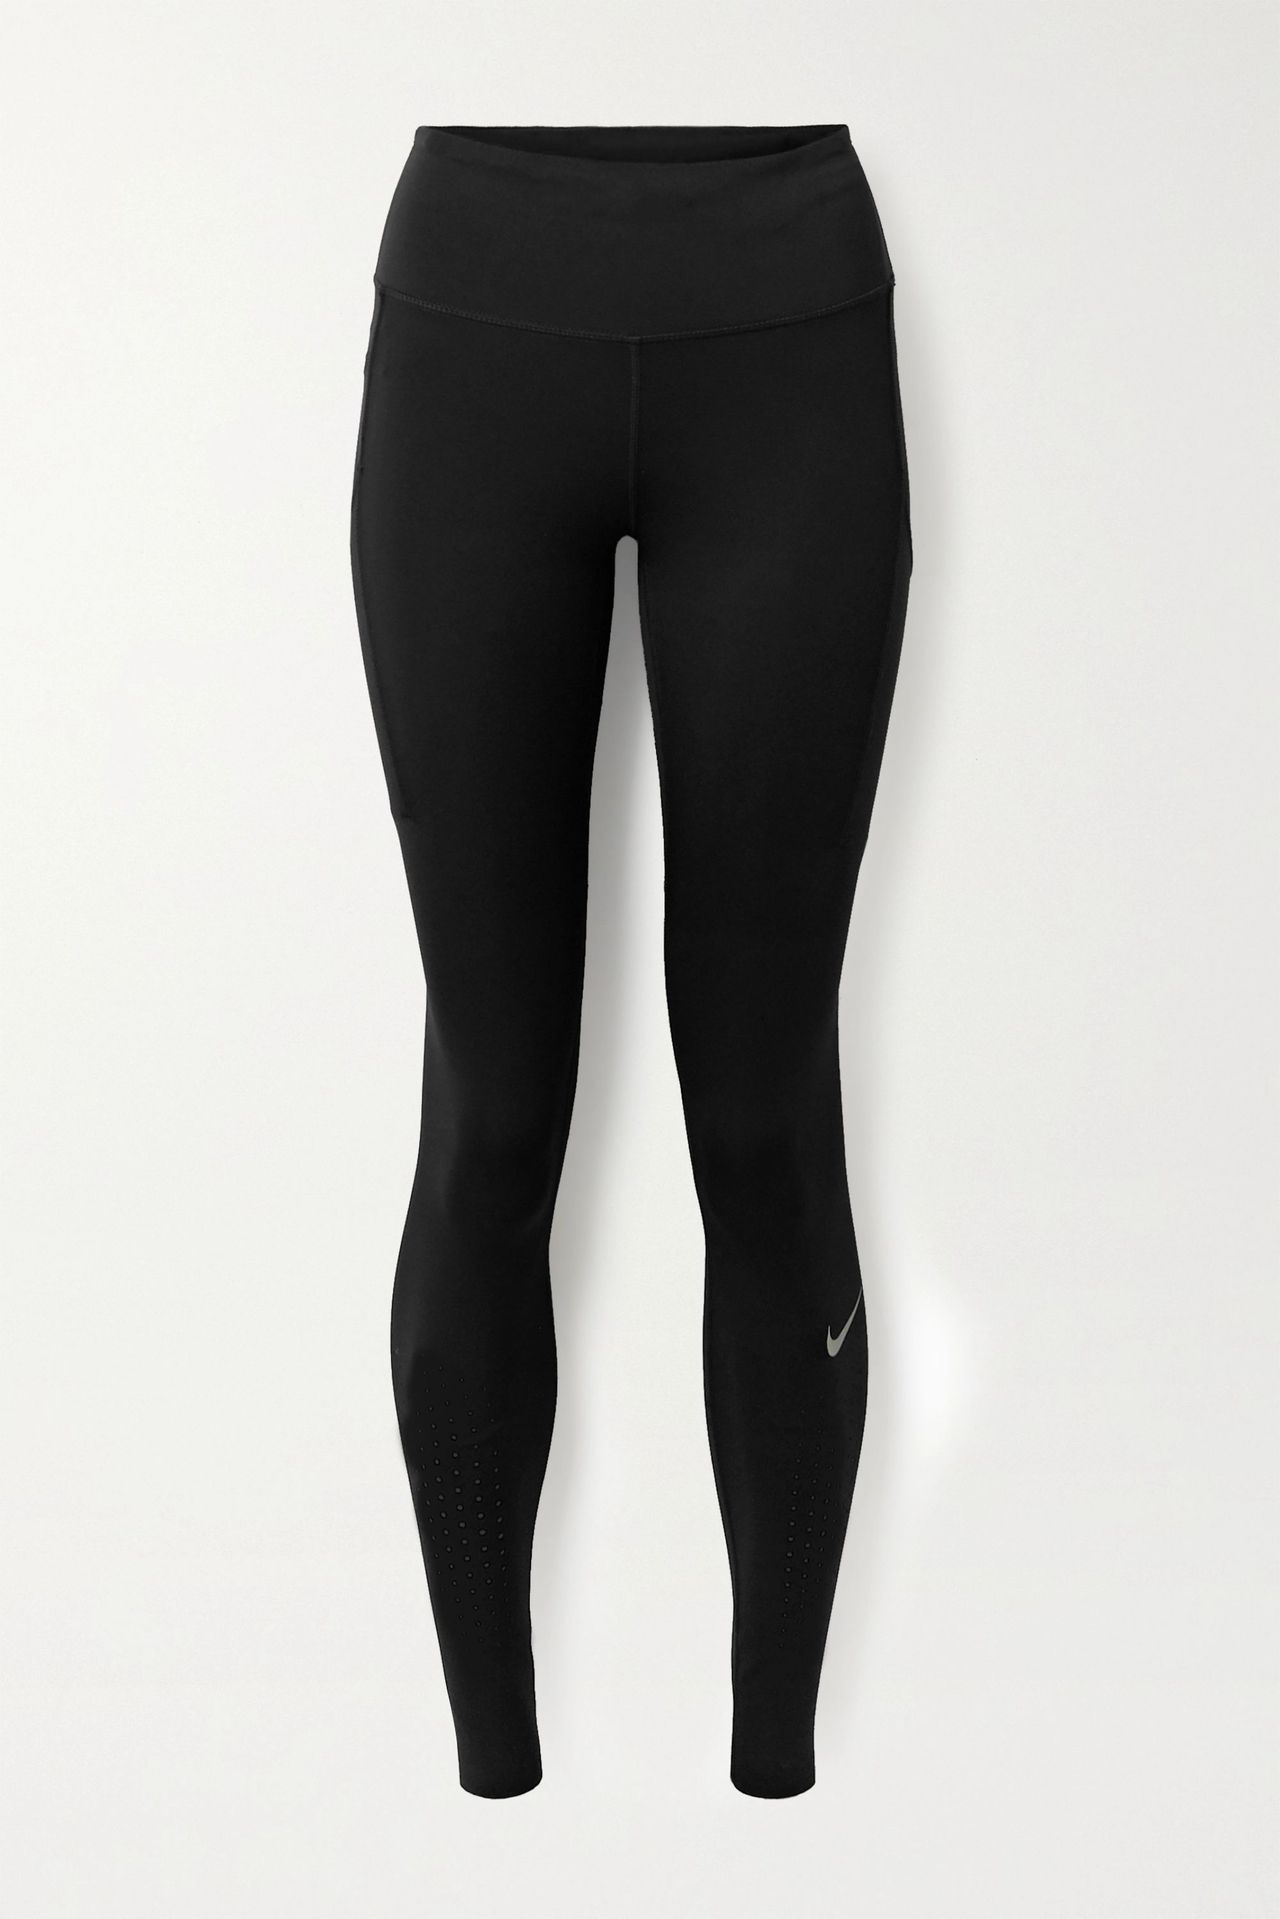 The 8 Best Black Leggings With Insane Amazon Reviews | Who What Wear